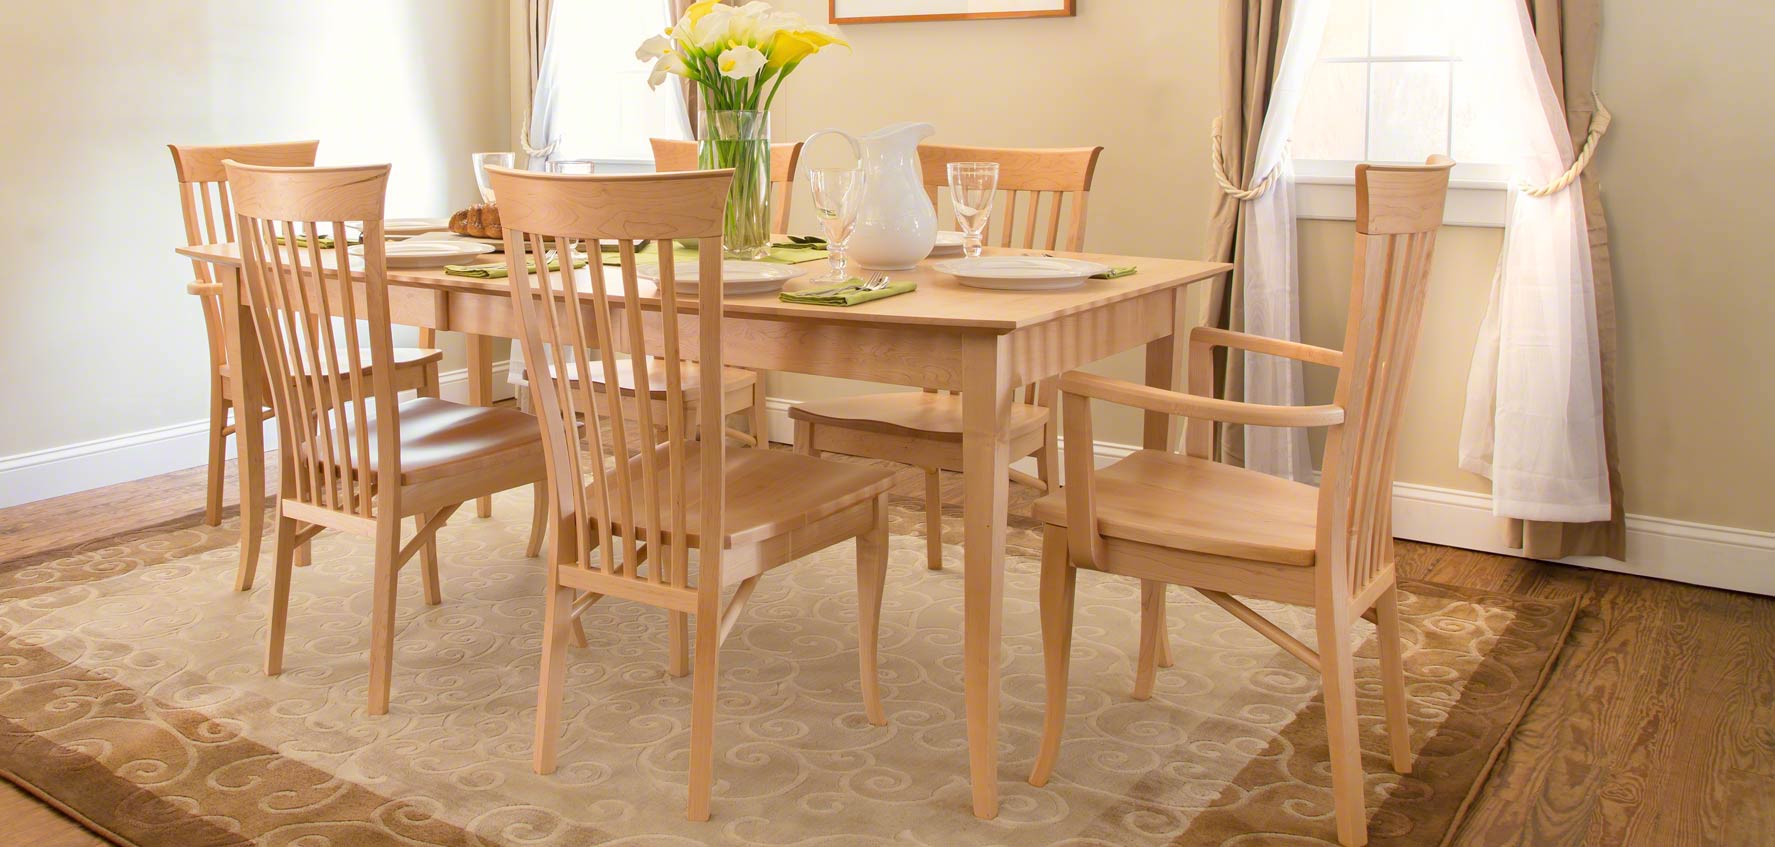 Solid Wood Furniture Makers - Homecare24